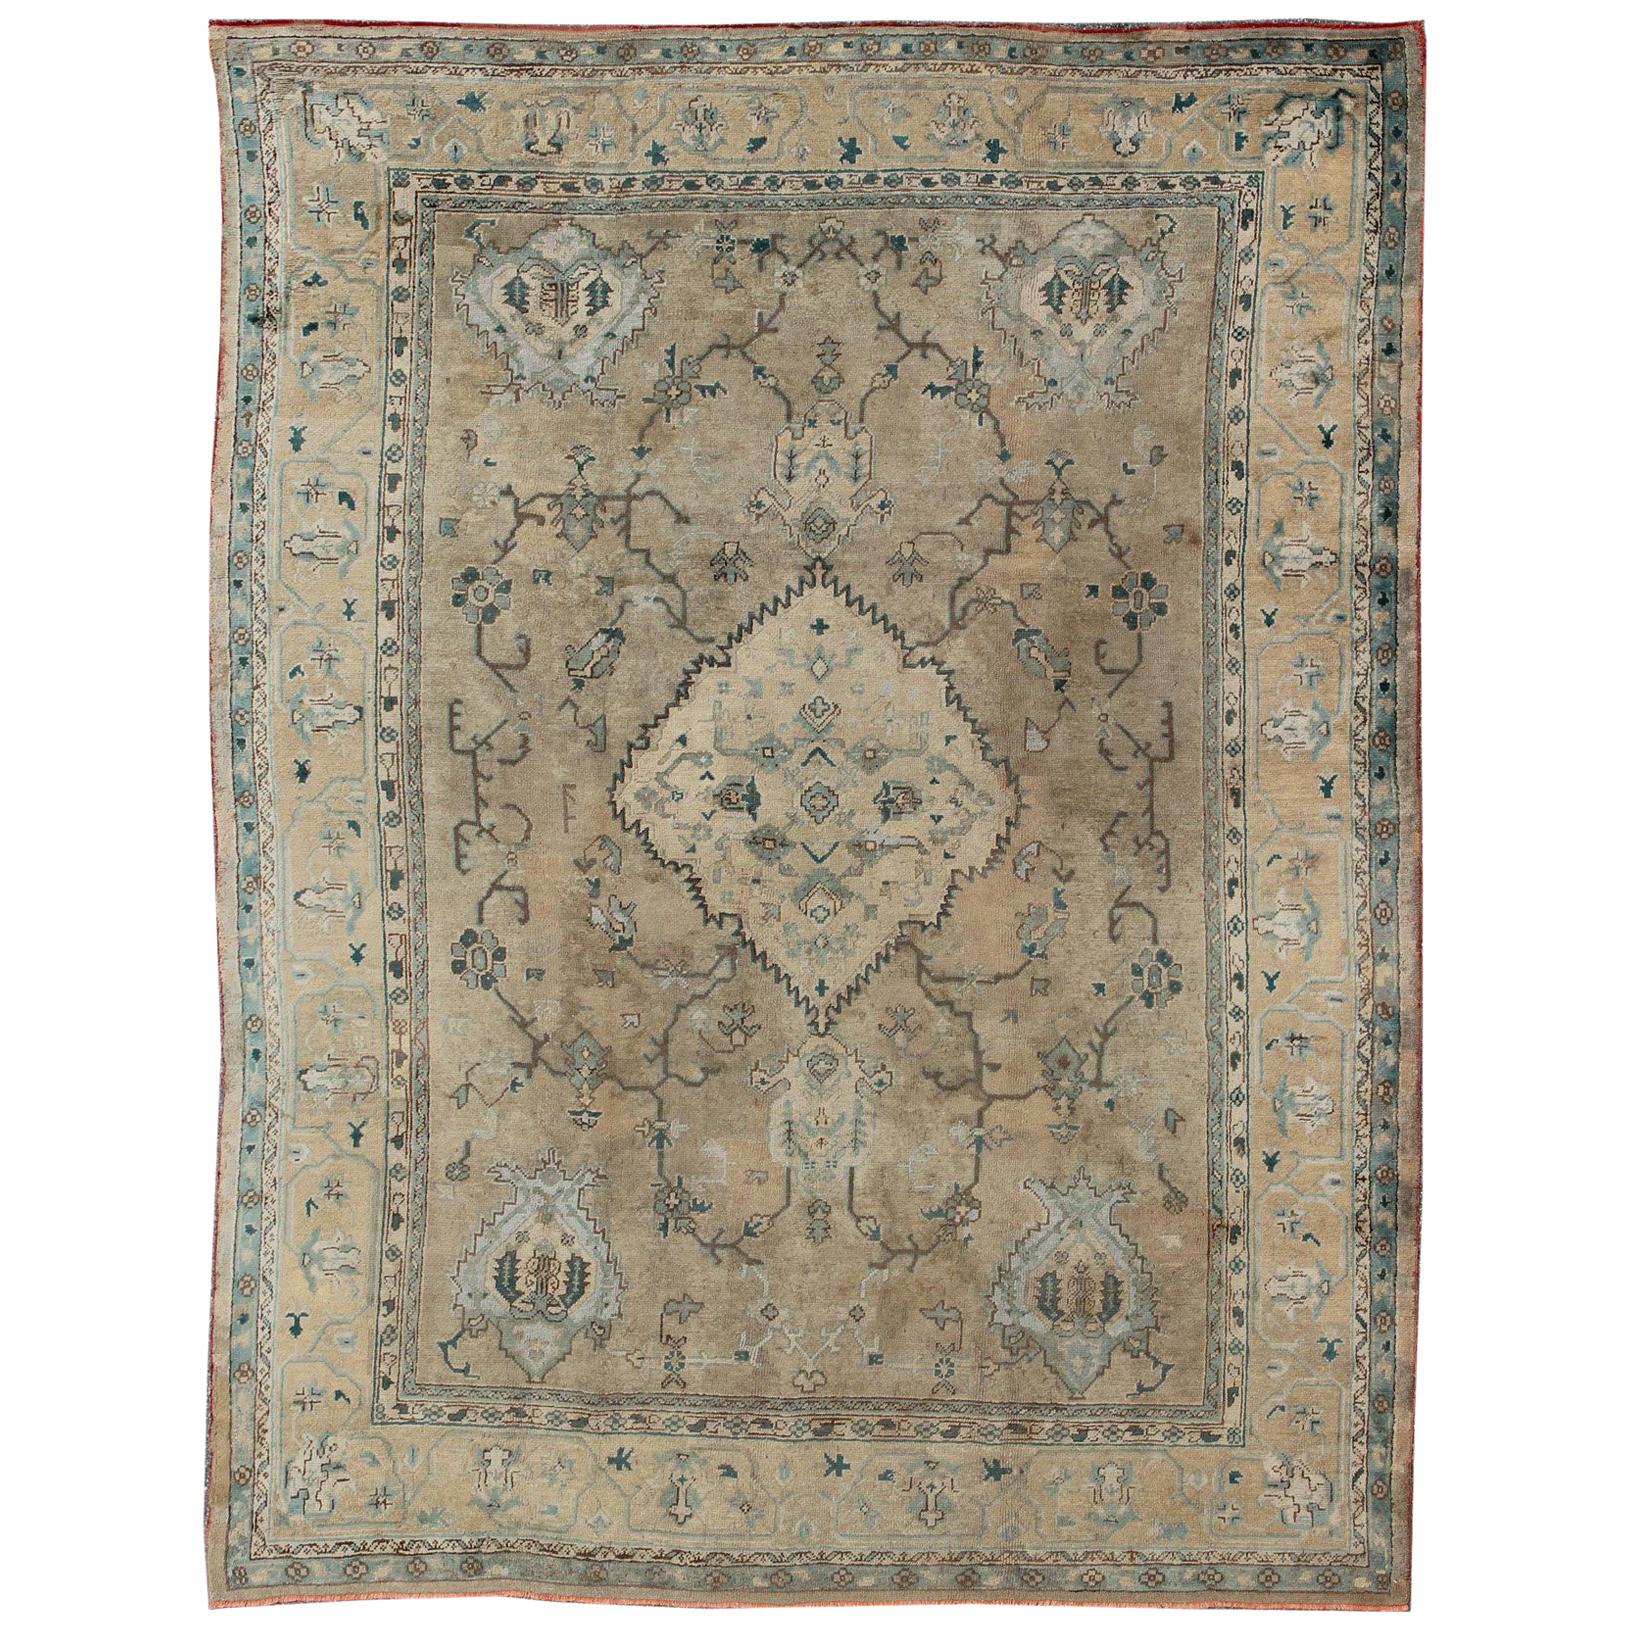 Neutral Antique Oushak Carpet in Shades of Teal, Green, Khaki, Taupe and Butter For Sale